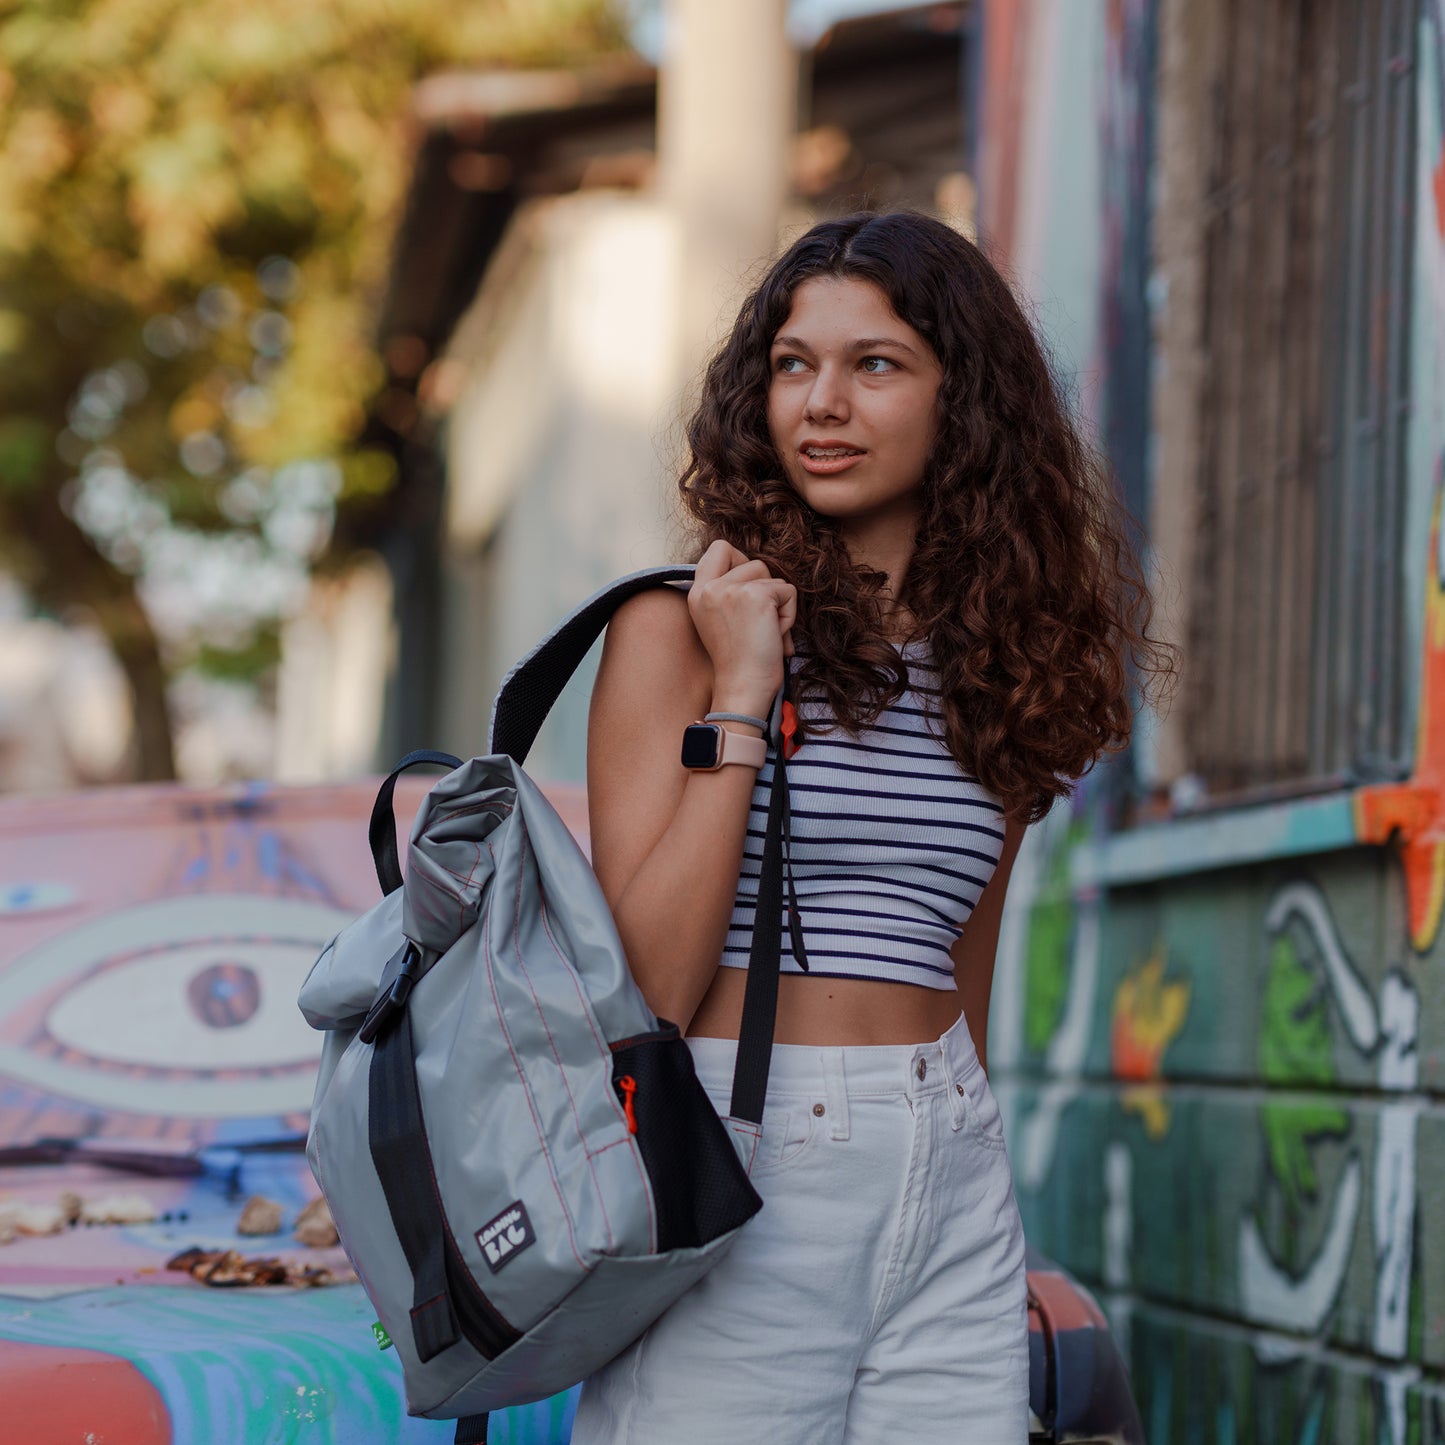  🌟 Urban Rolltop Backpack - Style meets Sustainability!  Upcycled, waterproof, durable.  Padded straps, luggage straps.  Perfect for laptops, books, travel.  Embrace sustainability in style! 🌿💼✨